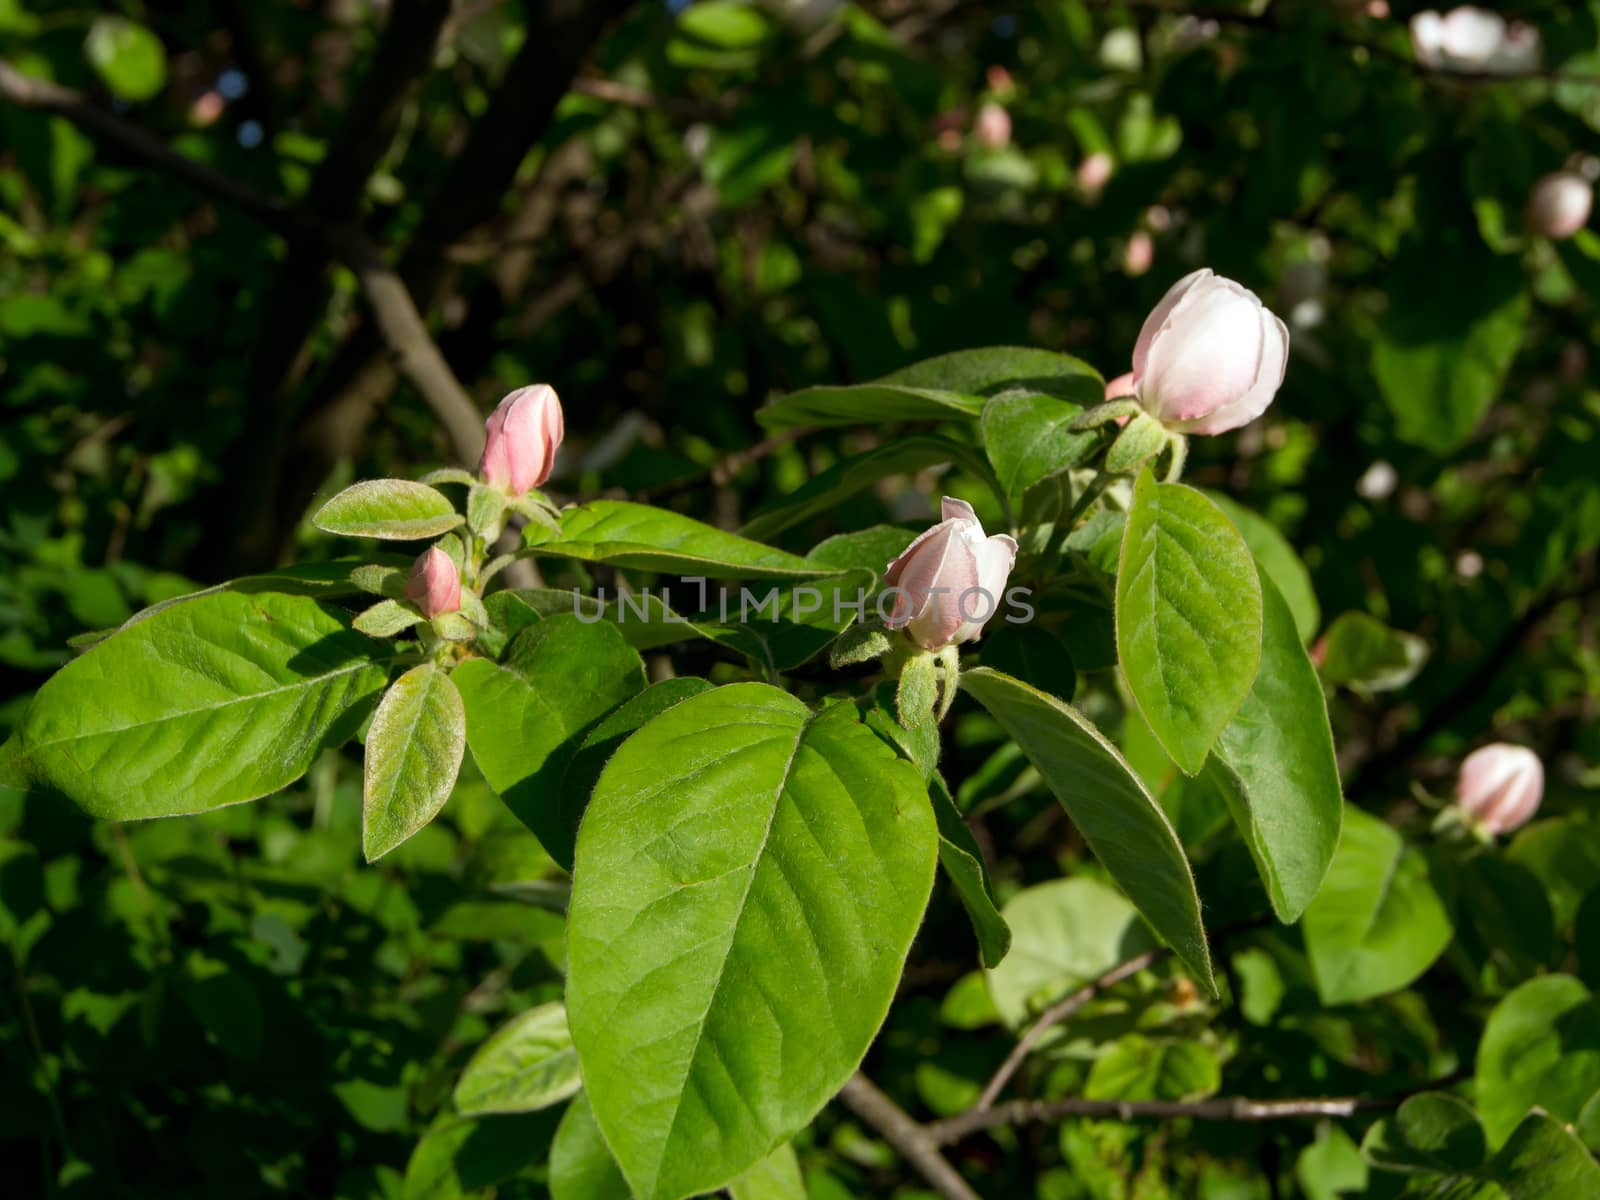 The flower of quince (Cydonia oblonga) in the trees